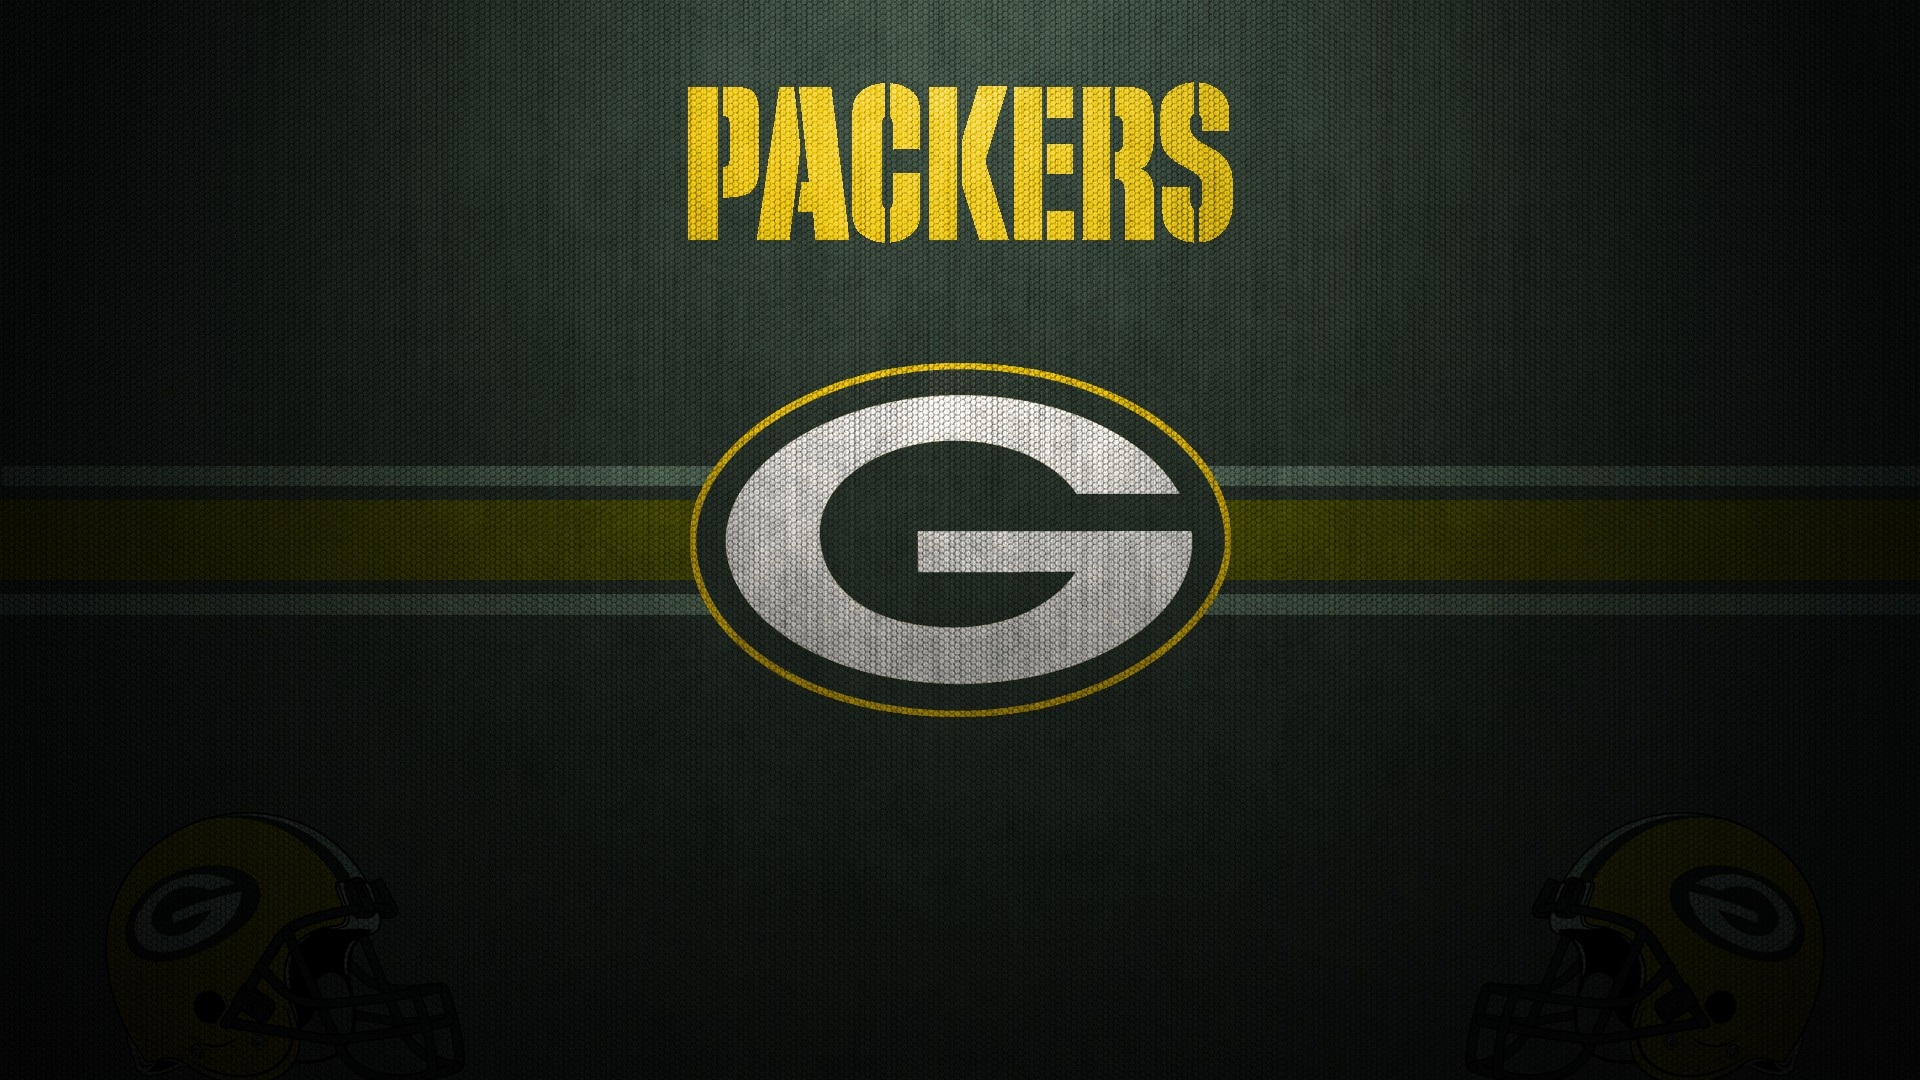 Green Bay Packers Logo HD Wallpapers with high-resolution 1920x1080 pixel. You can use this wallpaper for your Mac or Windows Desktop Background, iPhone, Android or Tablet and another Smartphone device